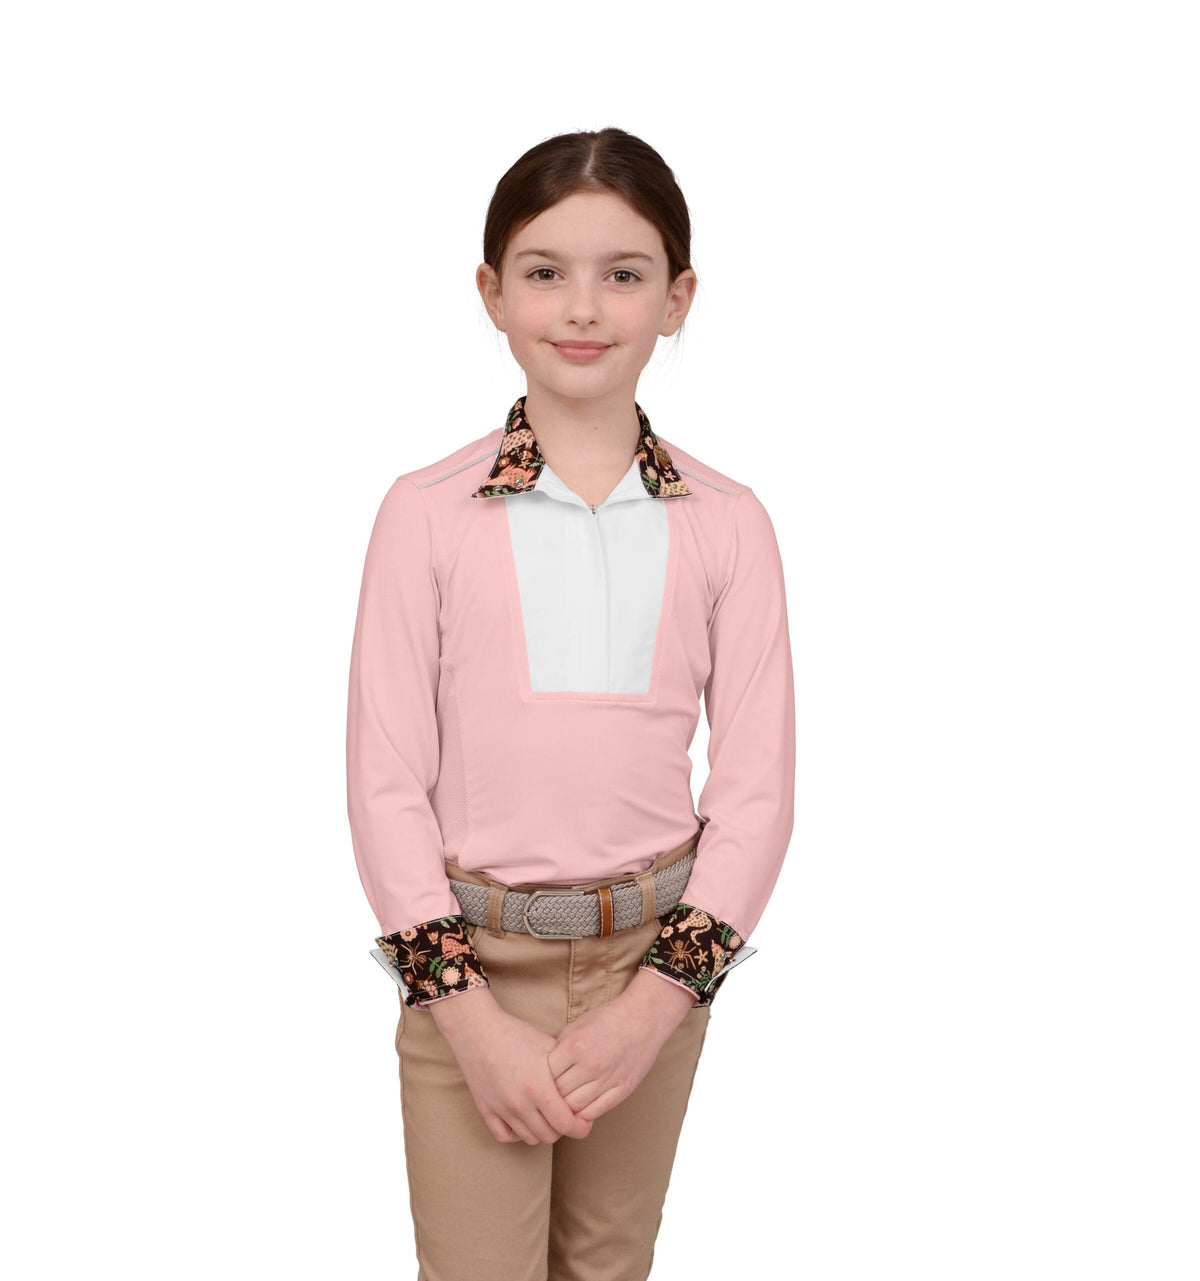 Chestnut Bay Show Shirt Blush / S Chestnut Bay- SkyCool Liberty Youth LS Show Shirt equestrian team apparel online tack store mobile tack store custom farm apparel custom show stable clothing equestrian lifestyle horse show clothing riding clothes horses equestrian tack store